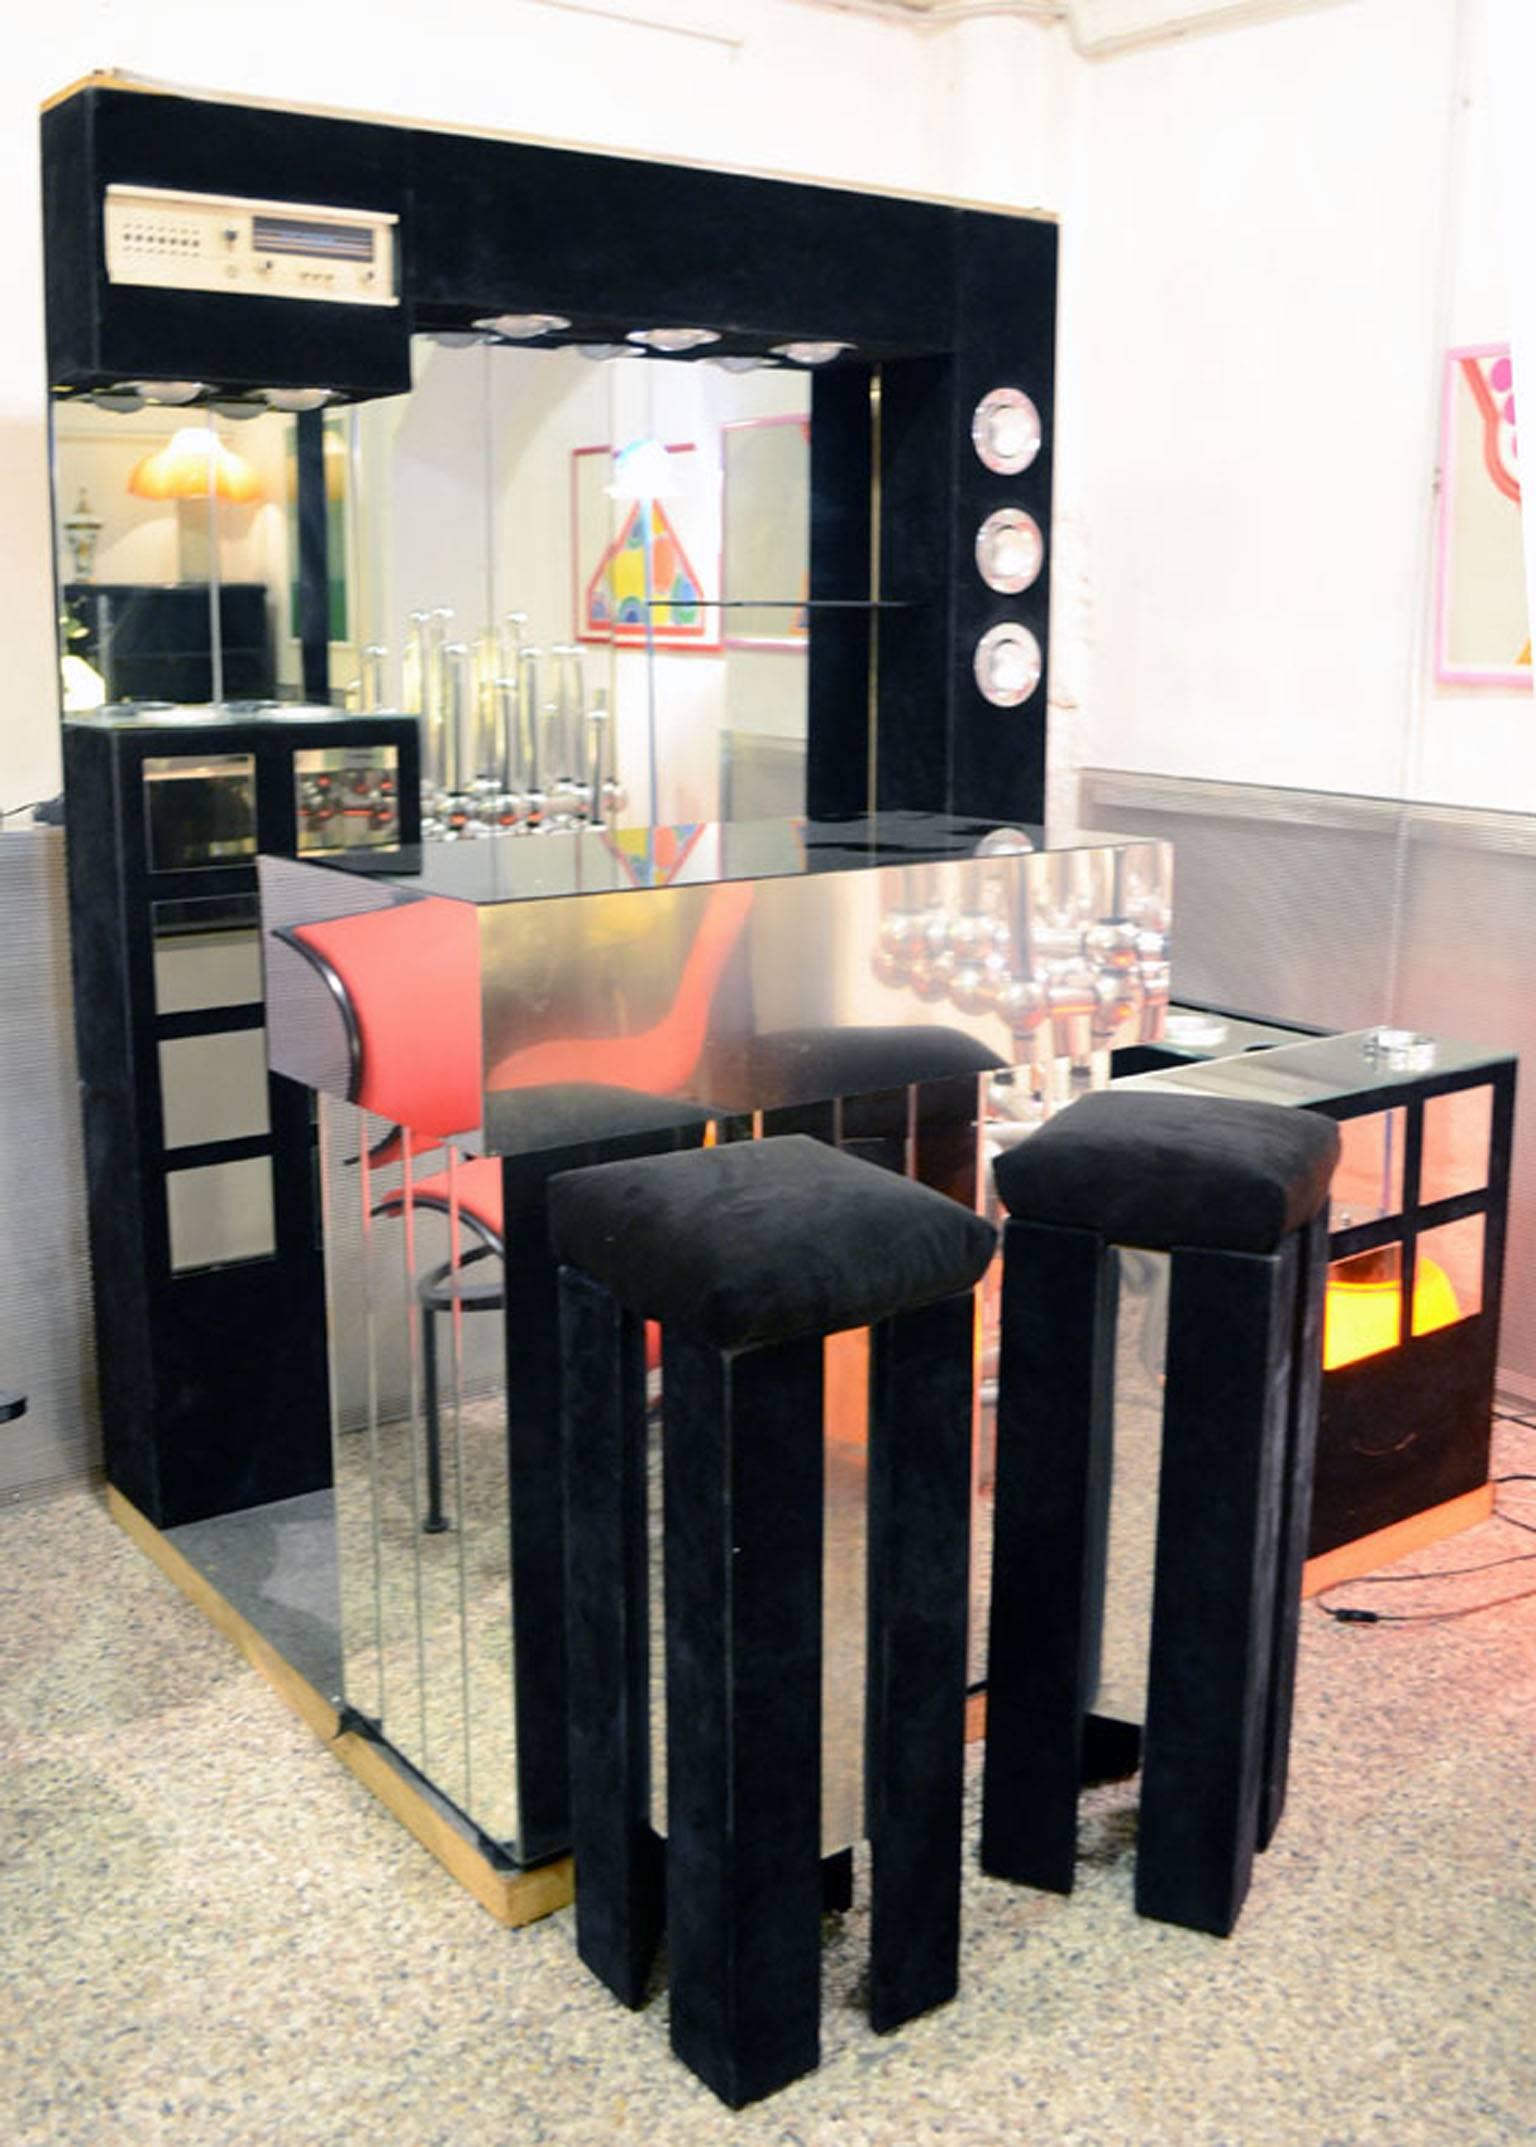 Mirror Italian 1960s Bar Furniture with Fridge, Radio and Two Stools For Sale